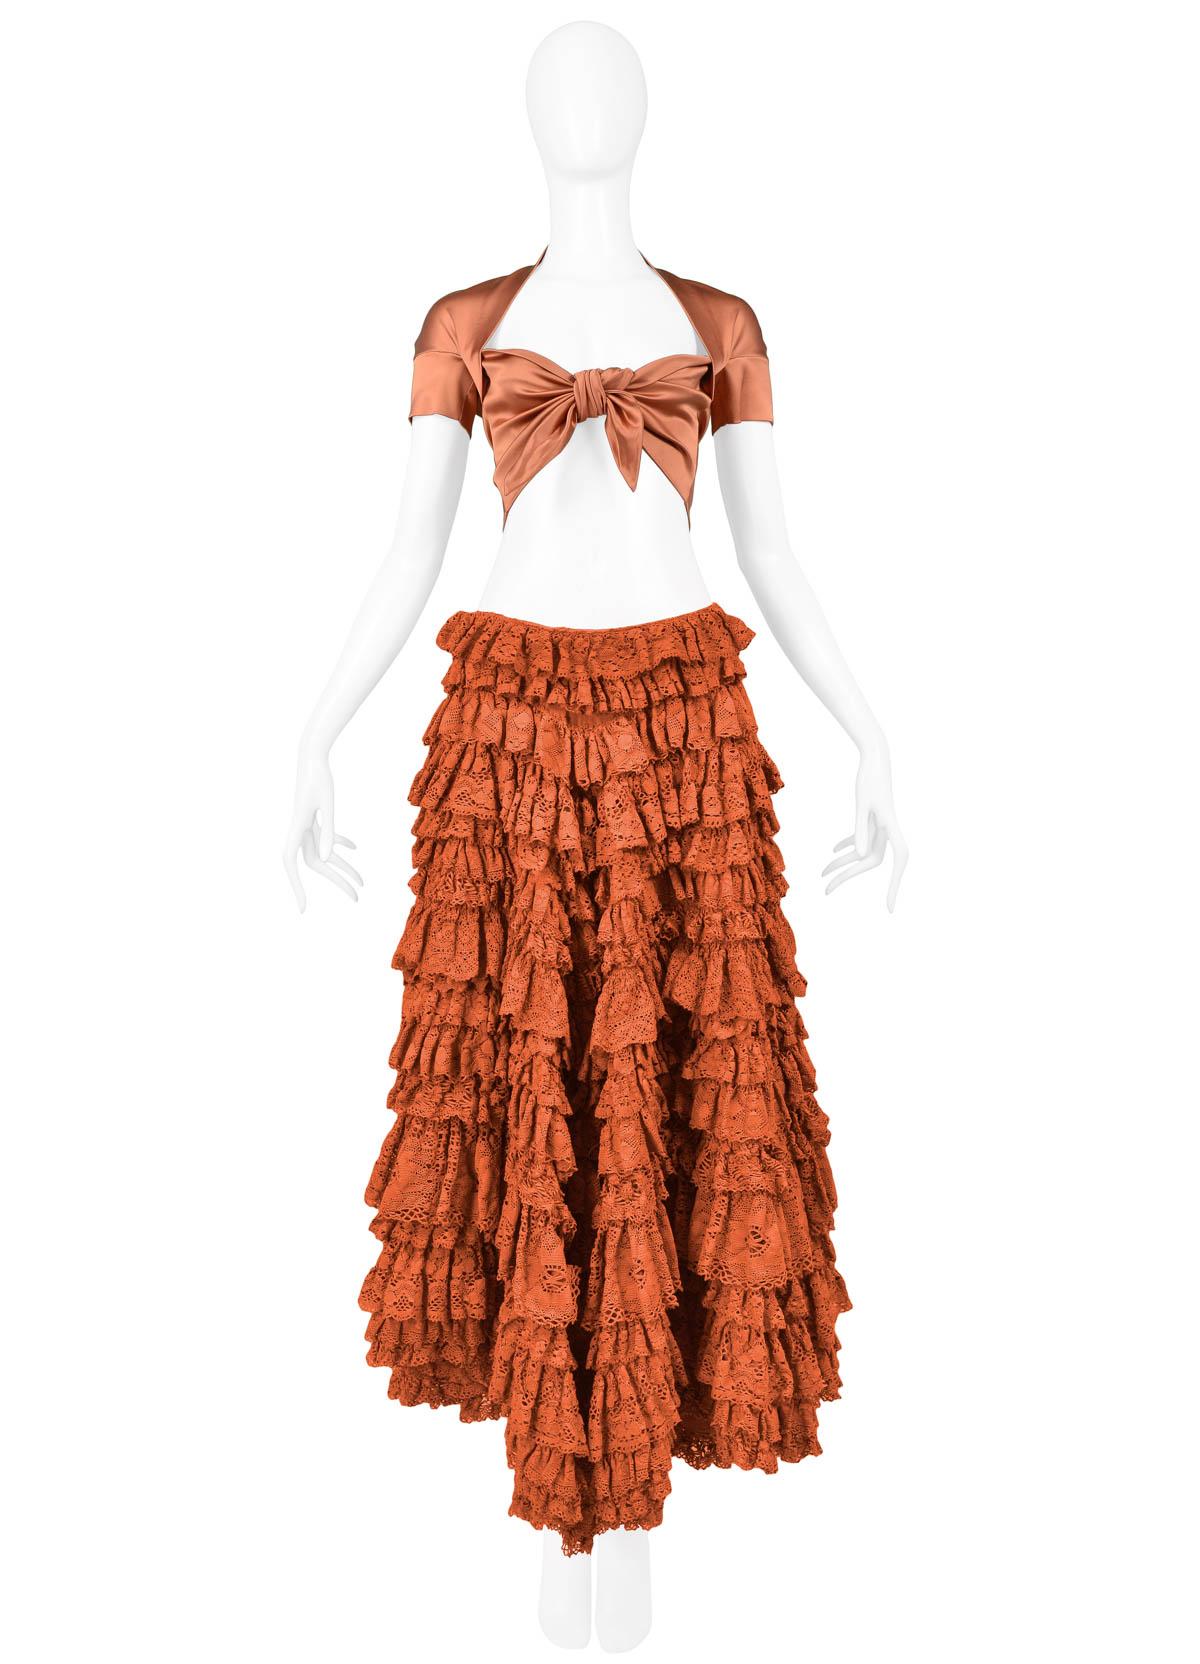 Vintage Romeo Gigli rust satin lycra top with cotton lace skirt ensemble. Top features crop fit, knot tie front closure, and short sleeves. Patio skirt features heavily ruffled cotton lace multi-tiers, high-low hem, and a side zipper closure. From